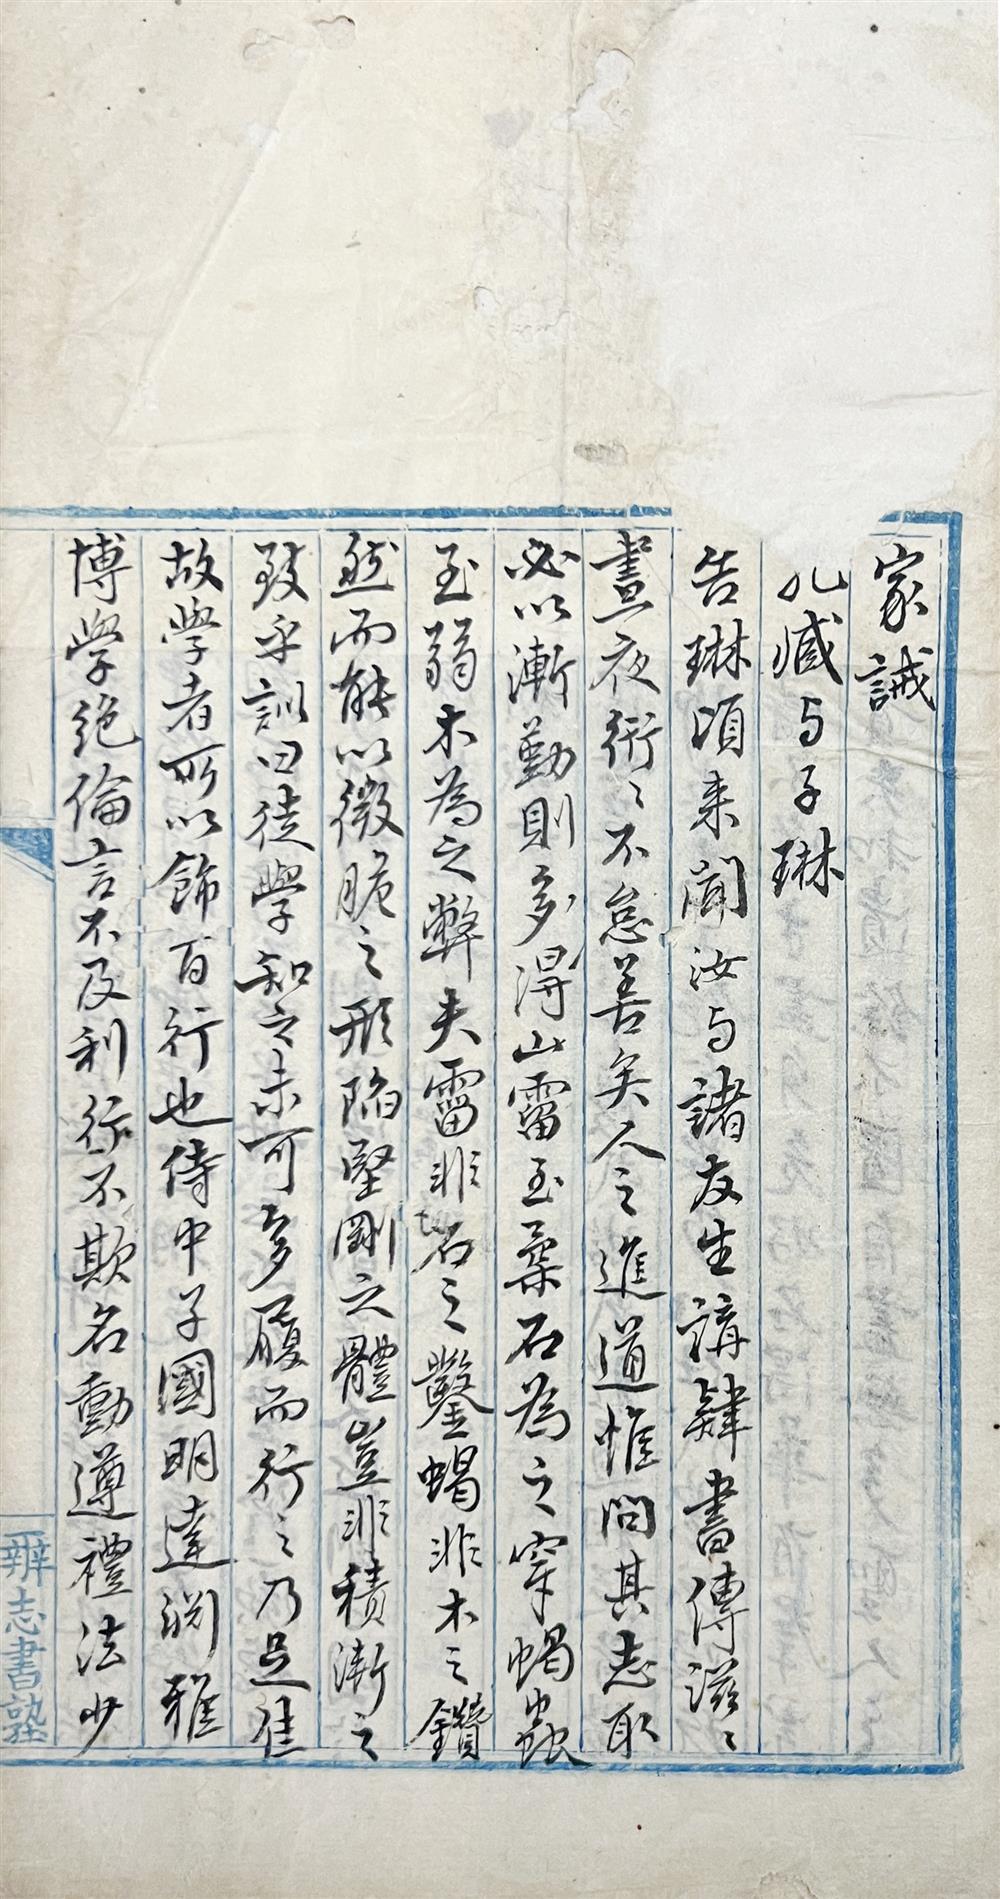 Opening up the possibility of inheriting the cultural vitality of ancient books, Li Zhaoluo held a symposium on the manuscripts of the "Eight Dynasties Full Text" manuscript | Li Zhaoluo | Ancient Books